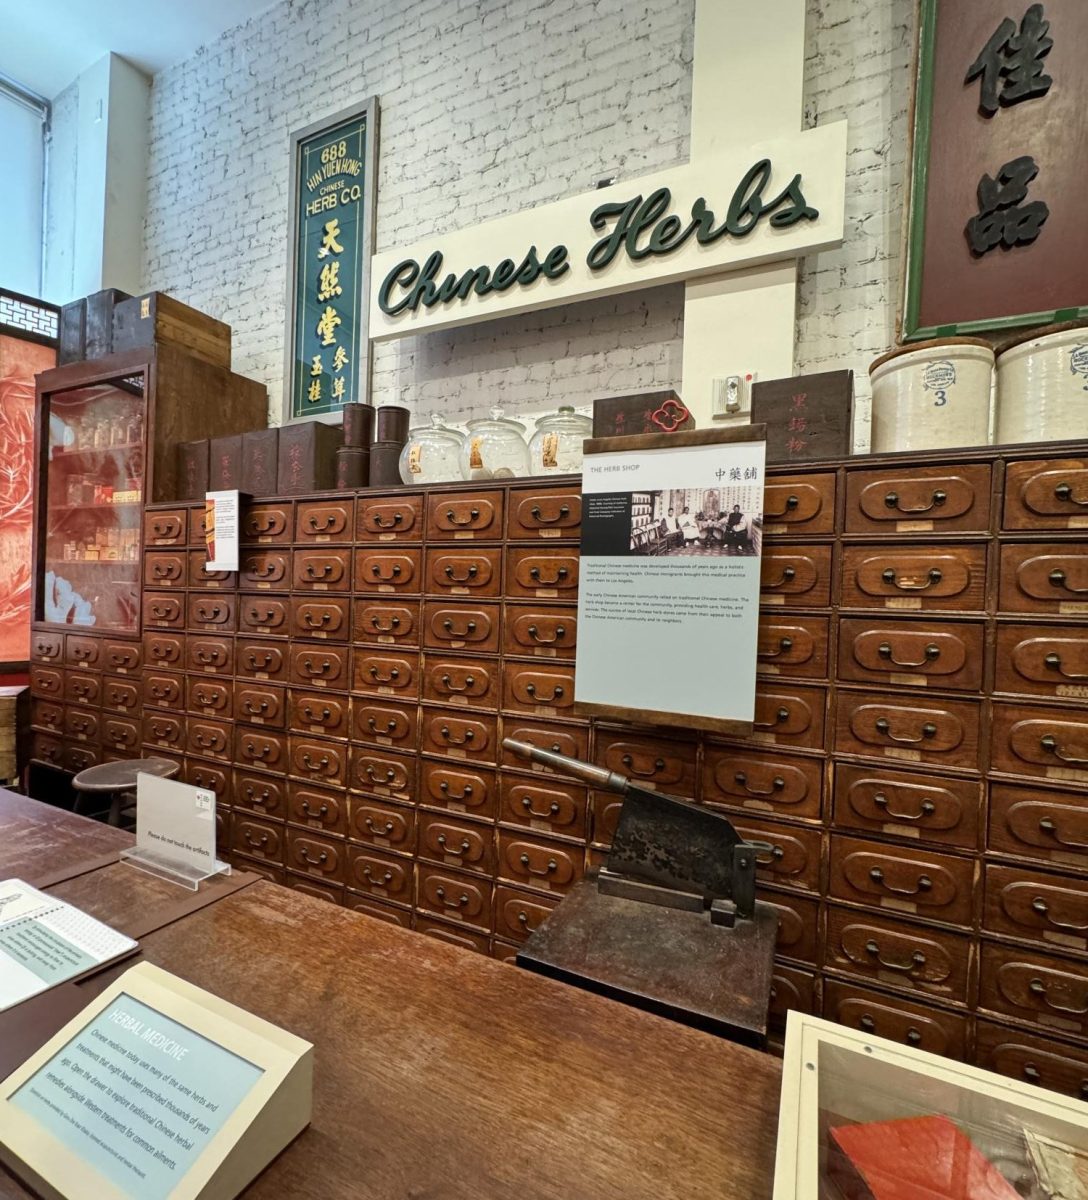 A fascinating room with an old-fashioned Chinese general store containing all sorts of herbs covering the walls from top to bottom, alongside infographics providing information about the history of traditional Chinese medicine.